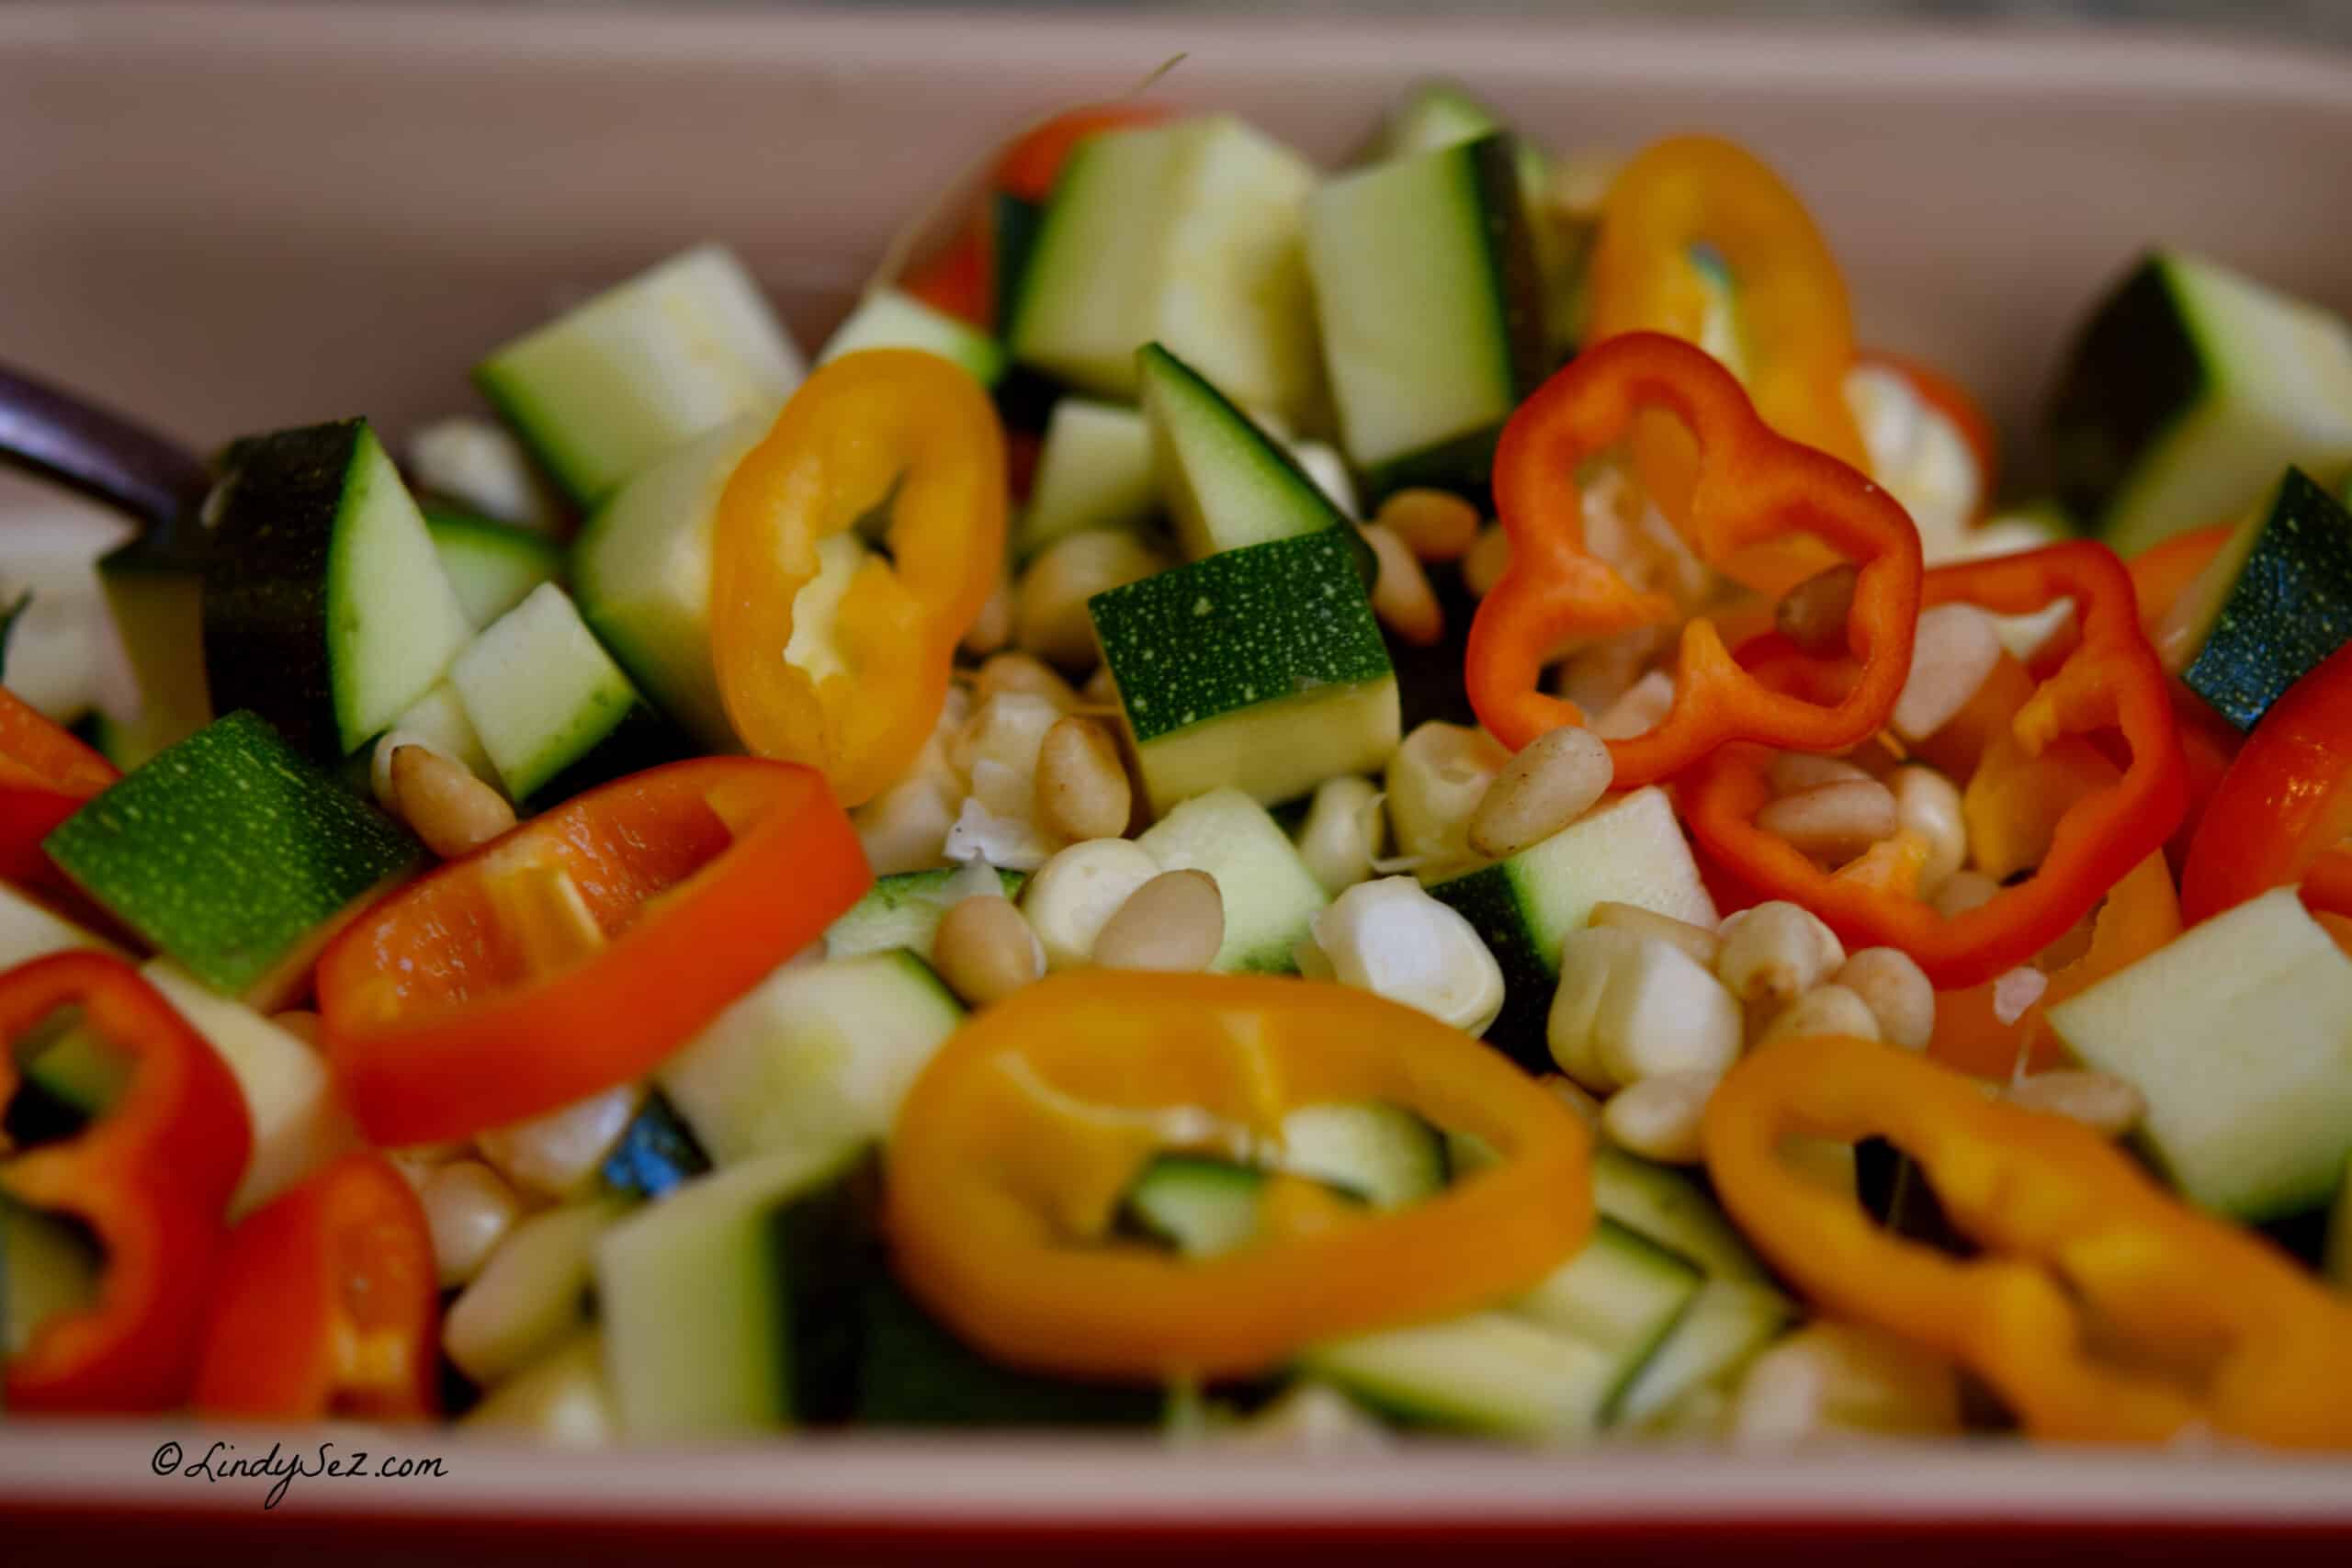 A bowl of prepared ingredients needed to make a fresh corn and zucchini saute with peppers and pine nuts.